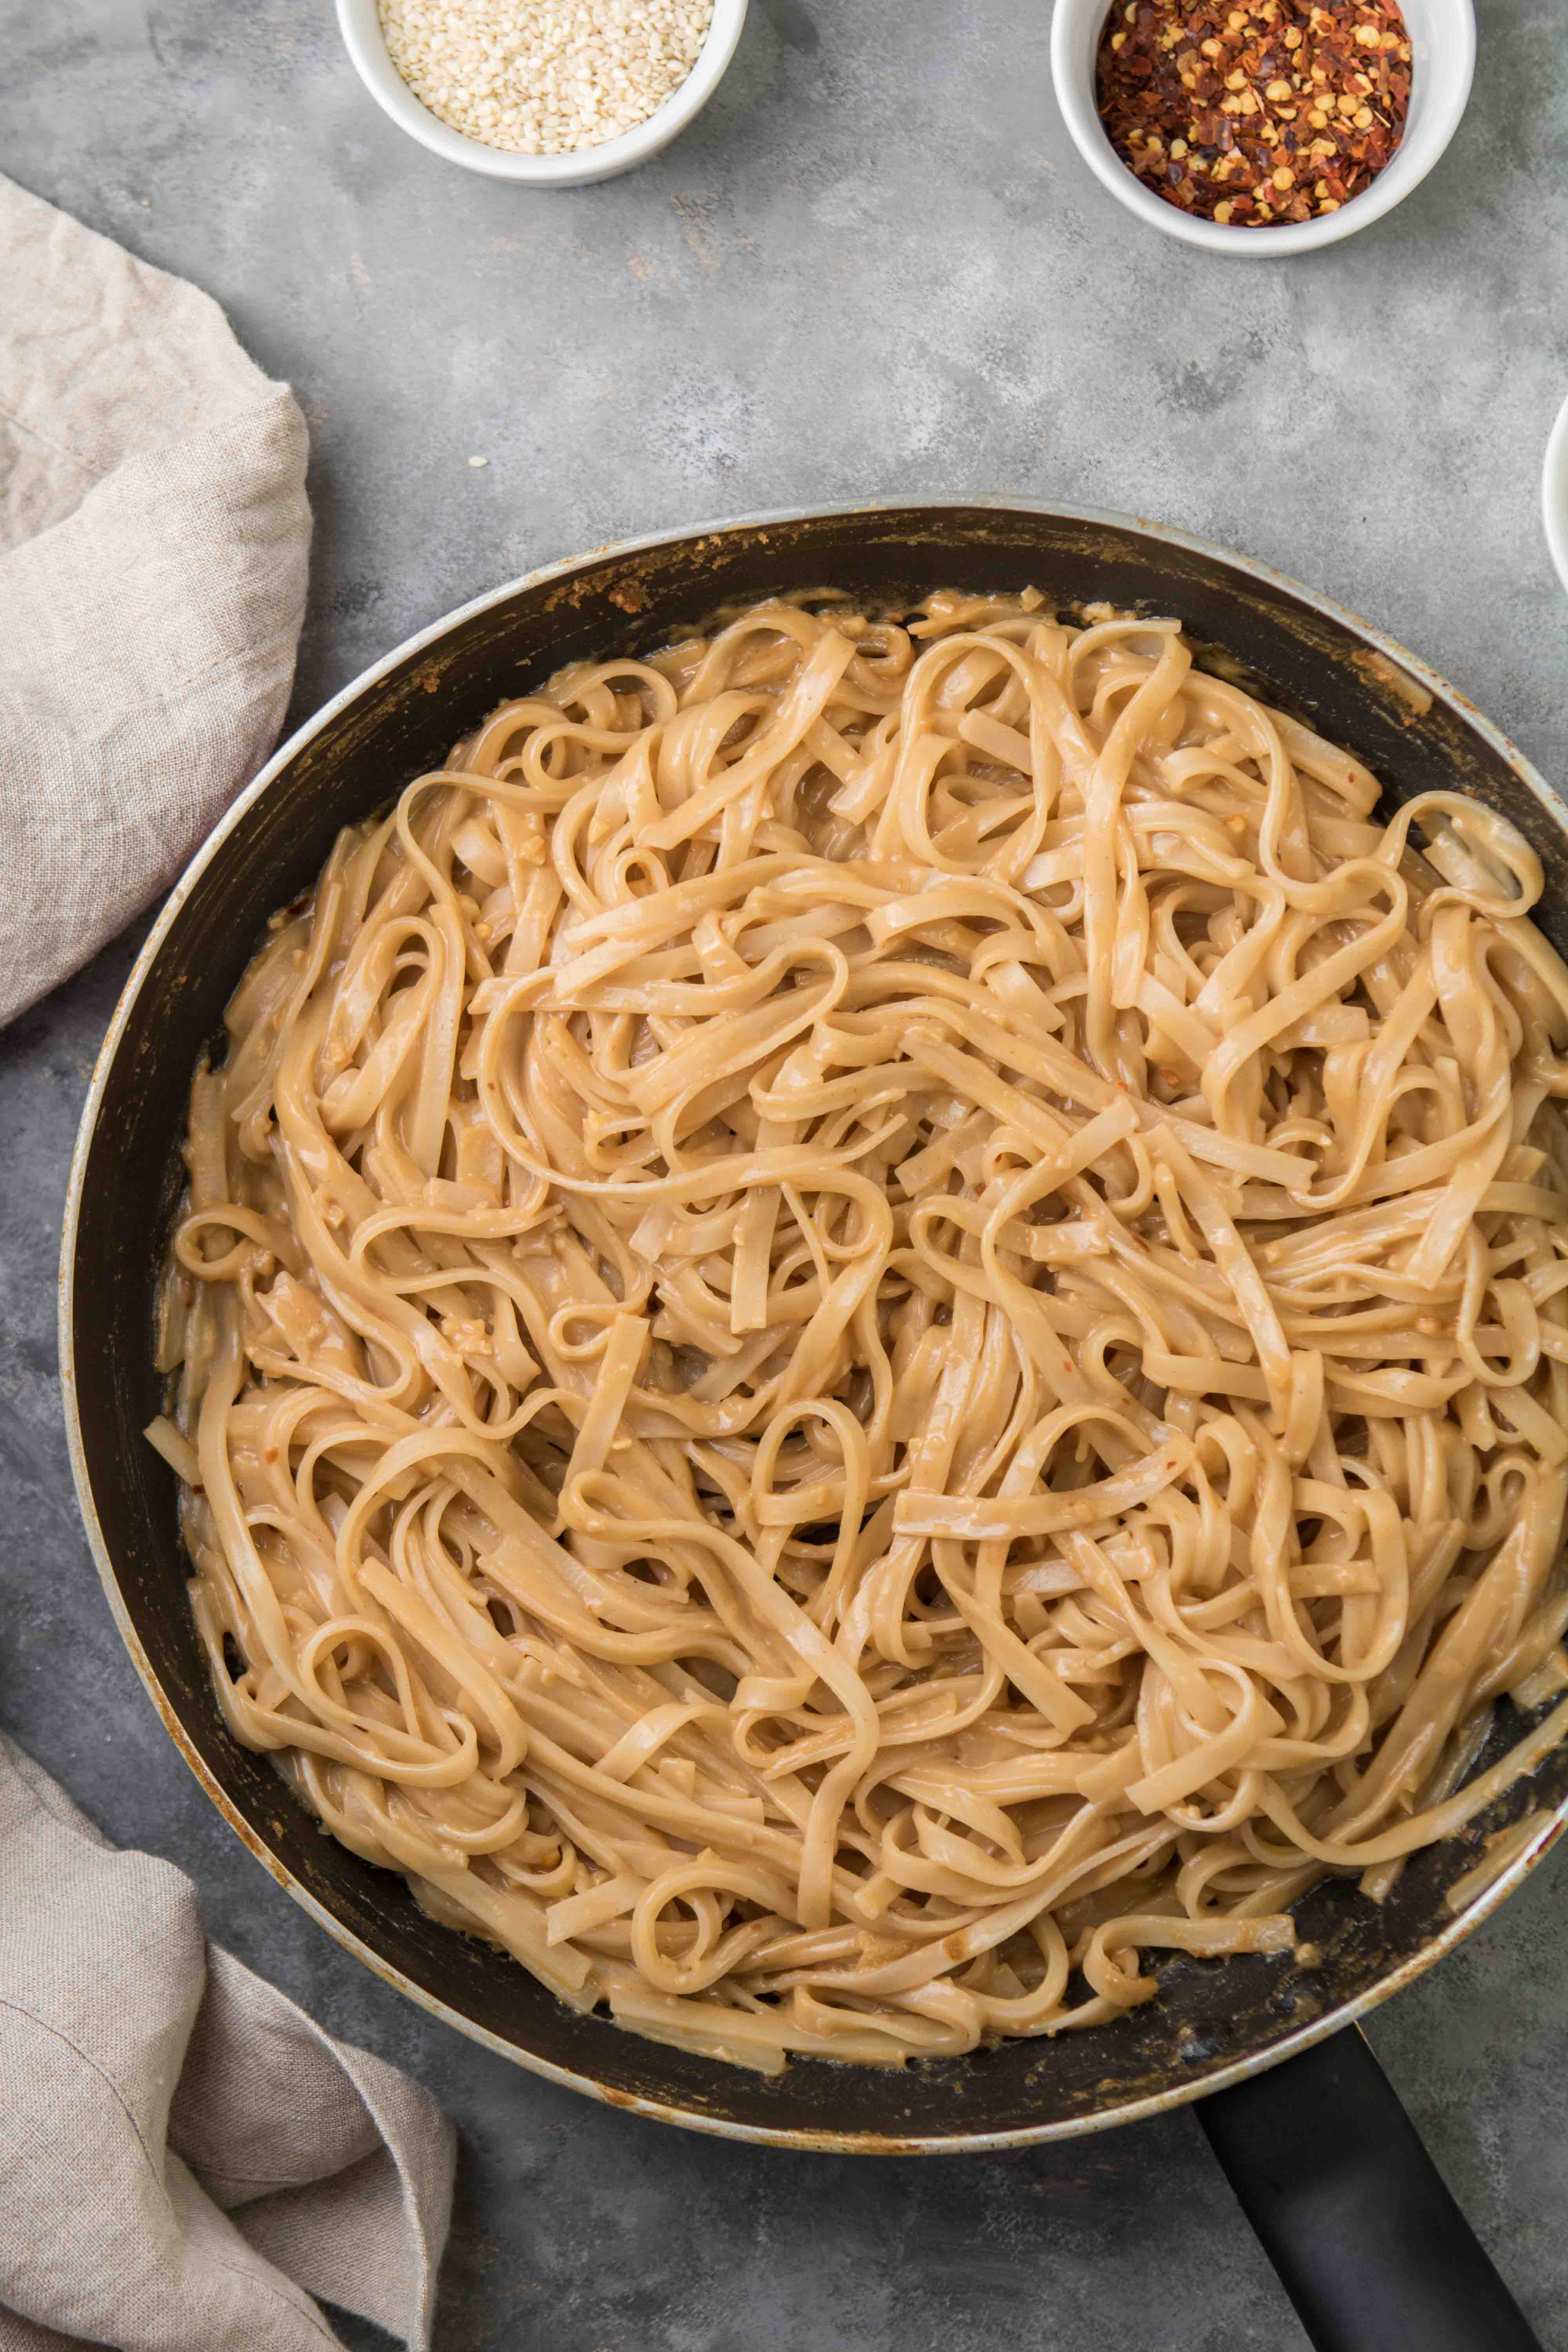 Step by step to make peanut butter noodles